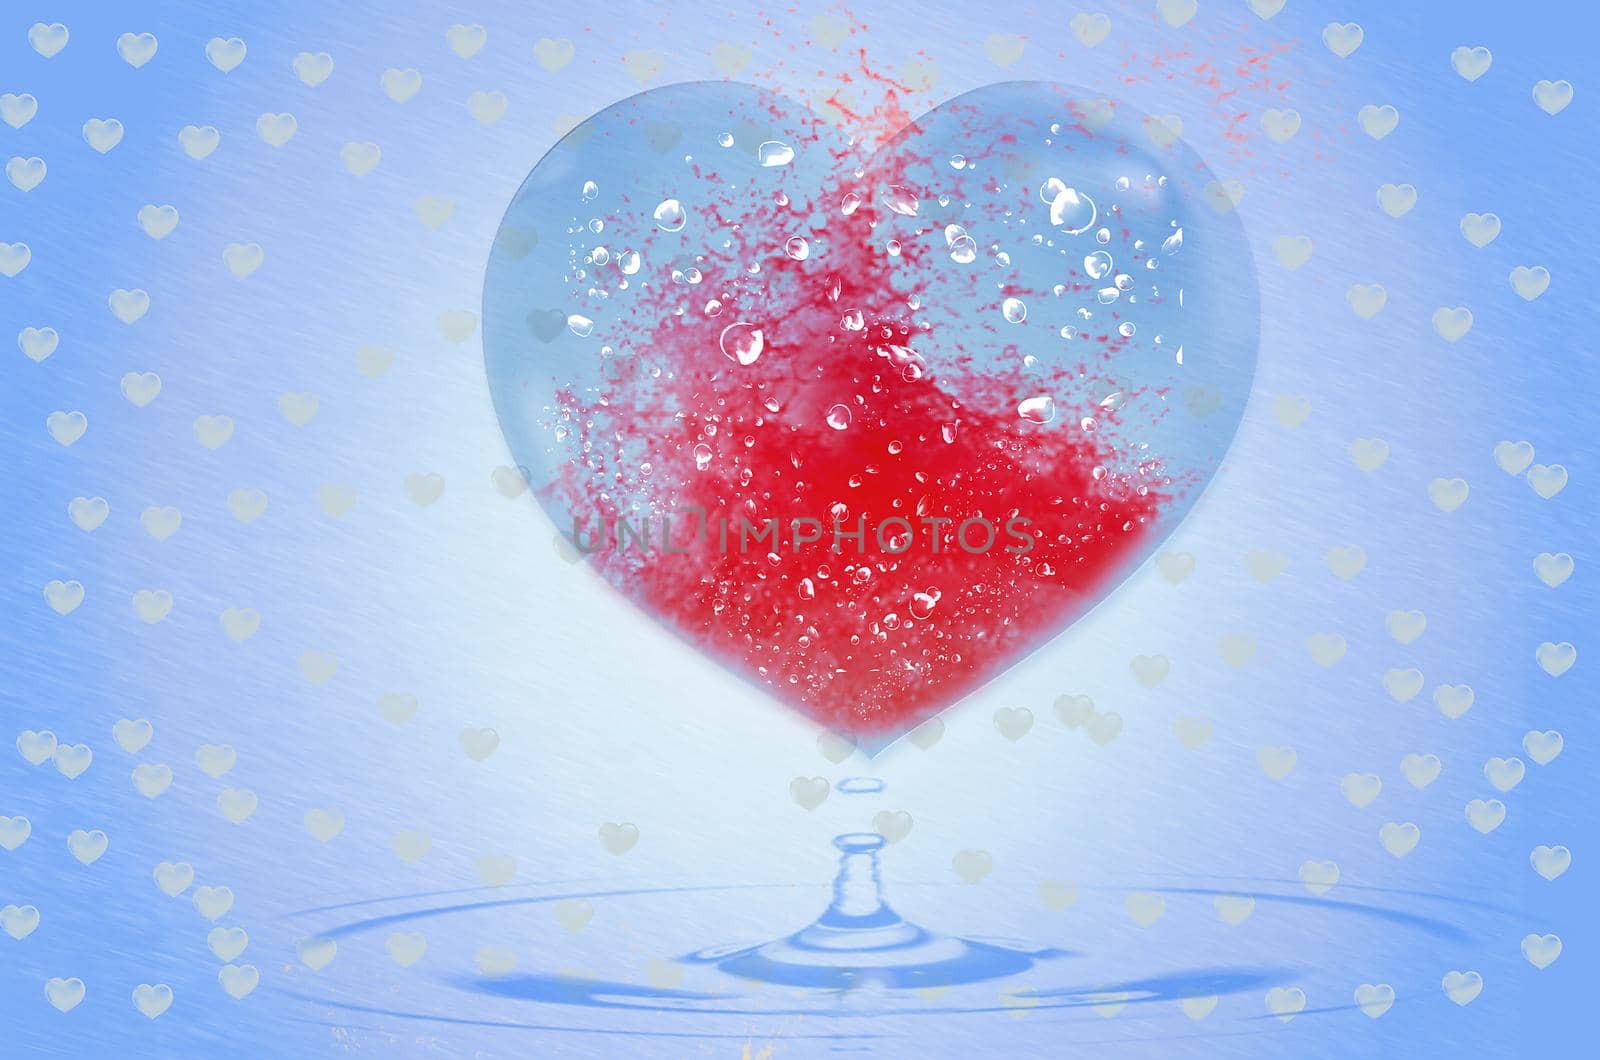 Dripping heart over the water. Blue glass heart filled with splashing red liquid on blue background. Symbol of love. Damaged or broken heart, break in relations. Stock illustration